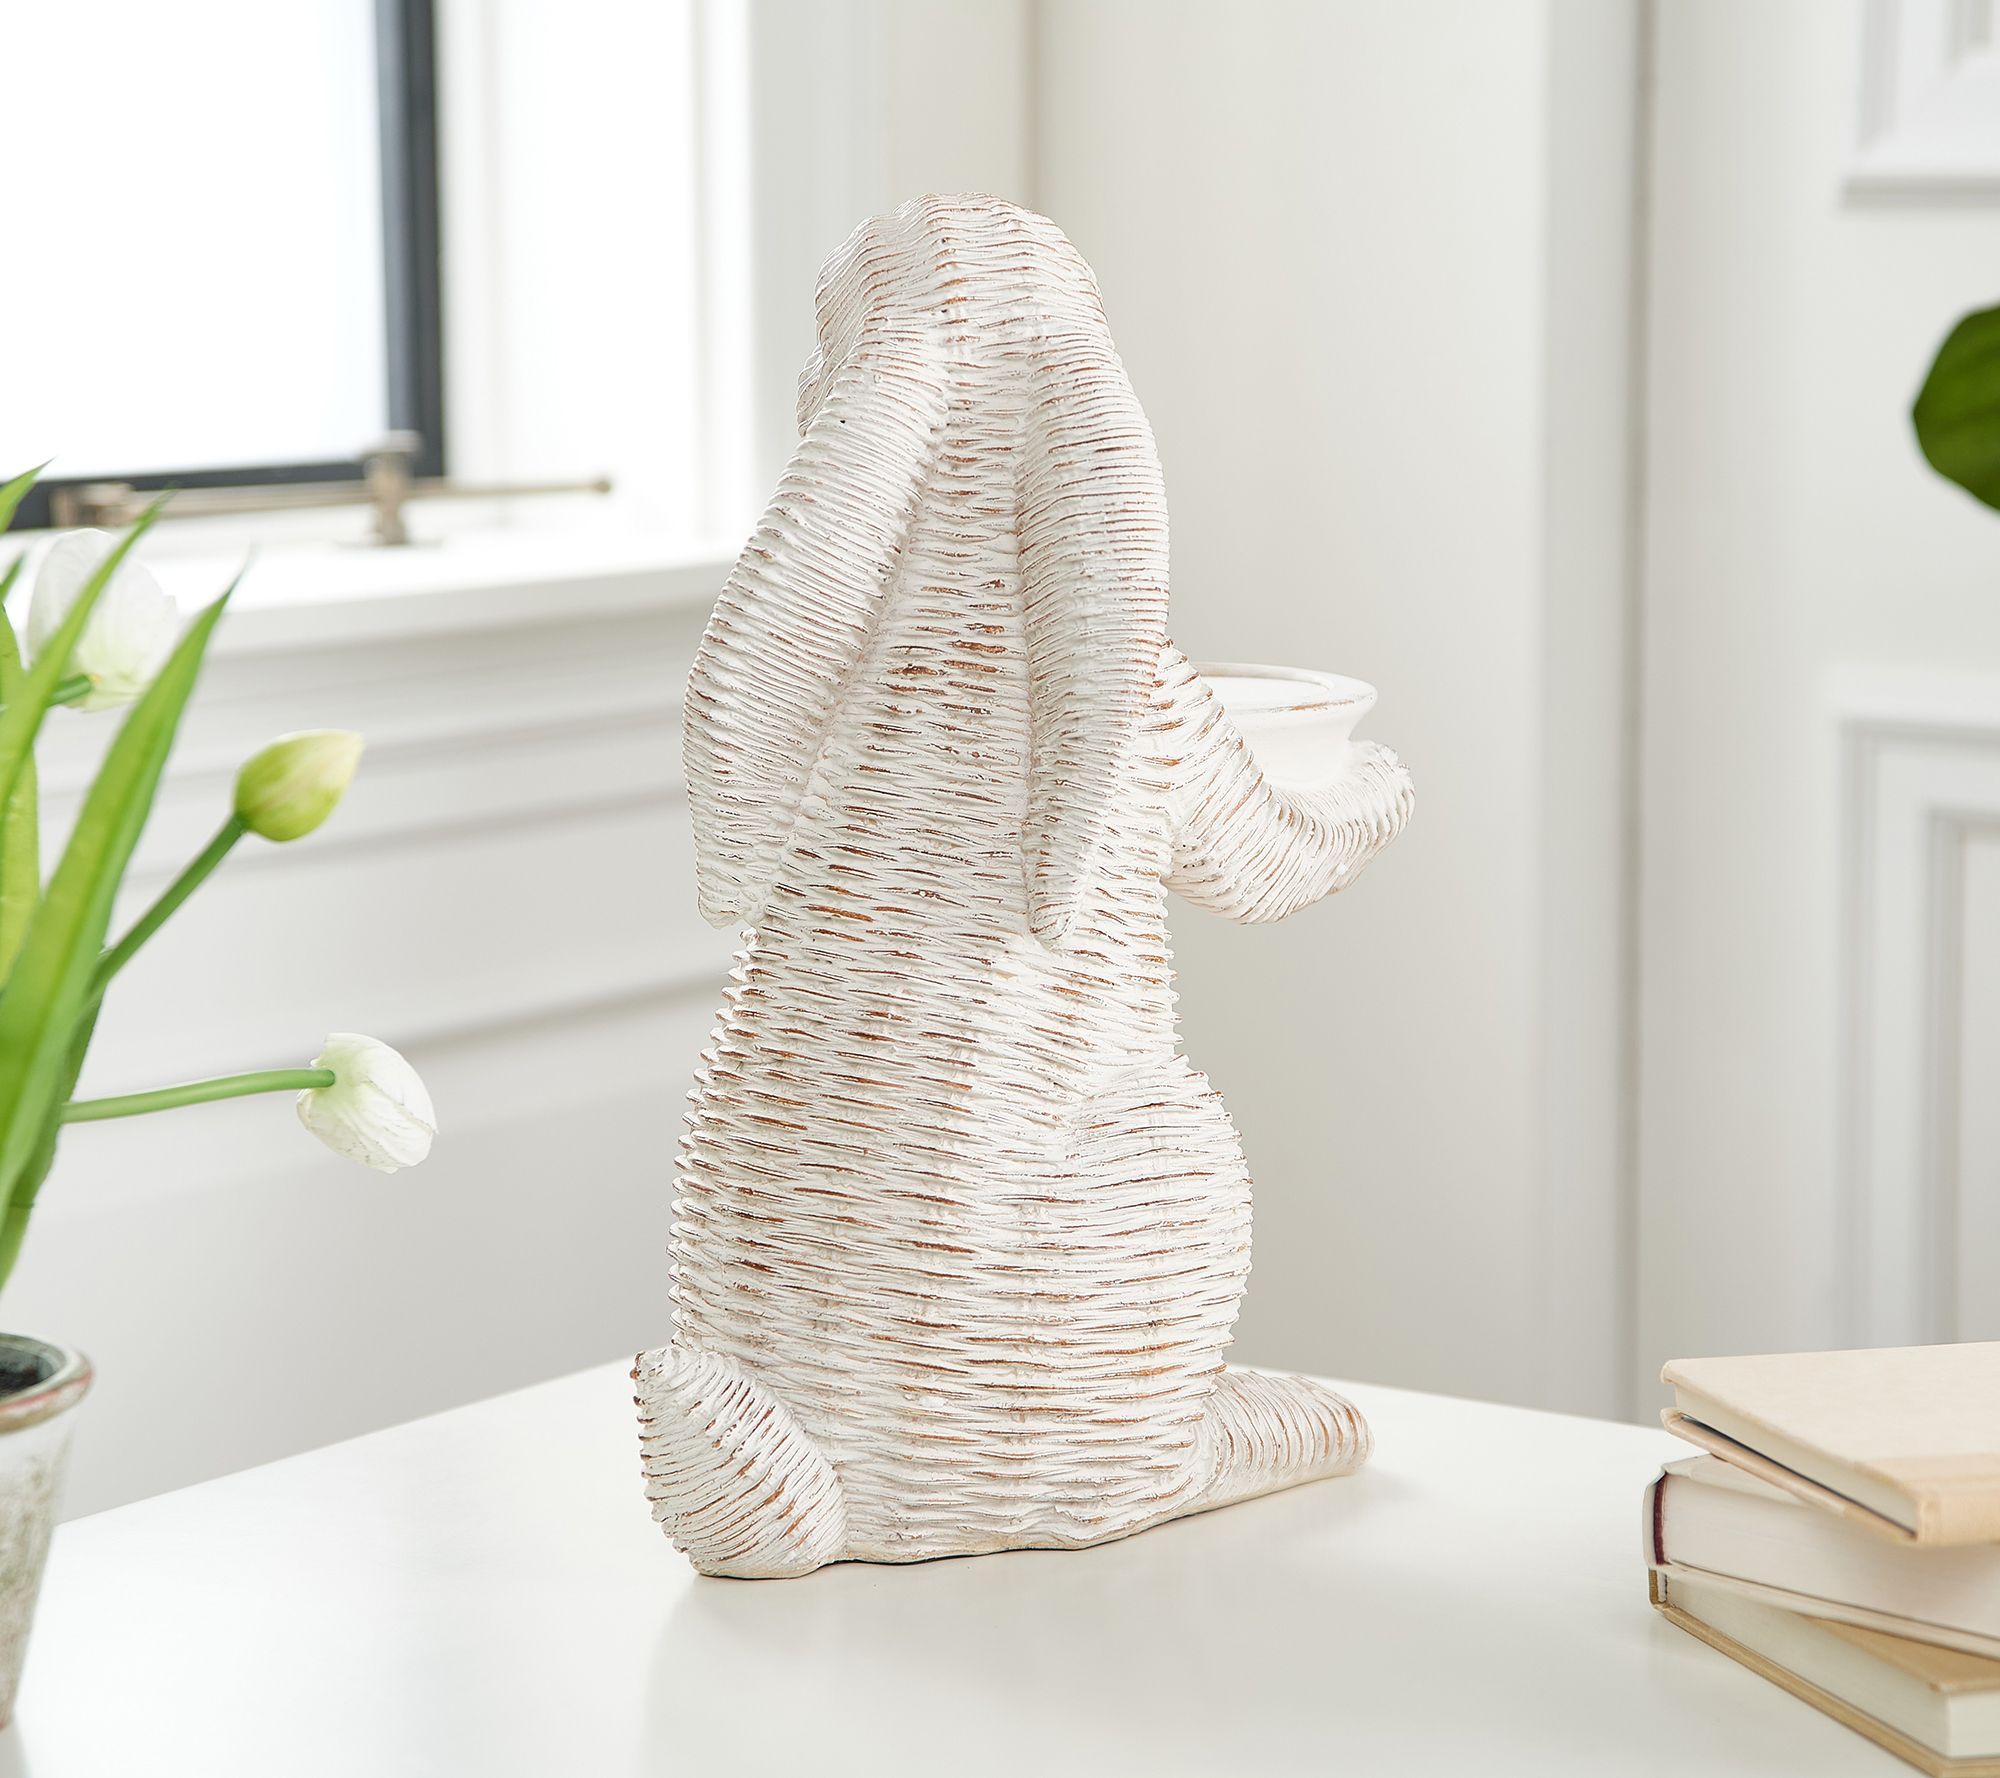 Set of 2 Rattan Wicker Bunny Figures with Ribbon by Valerie - QVC.com